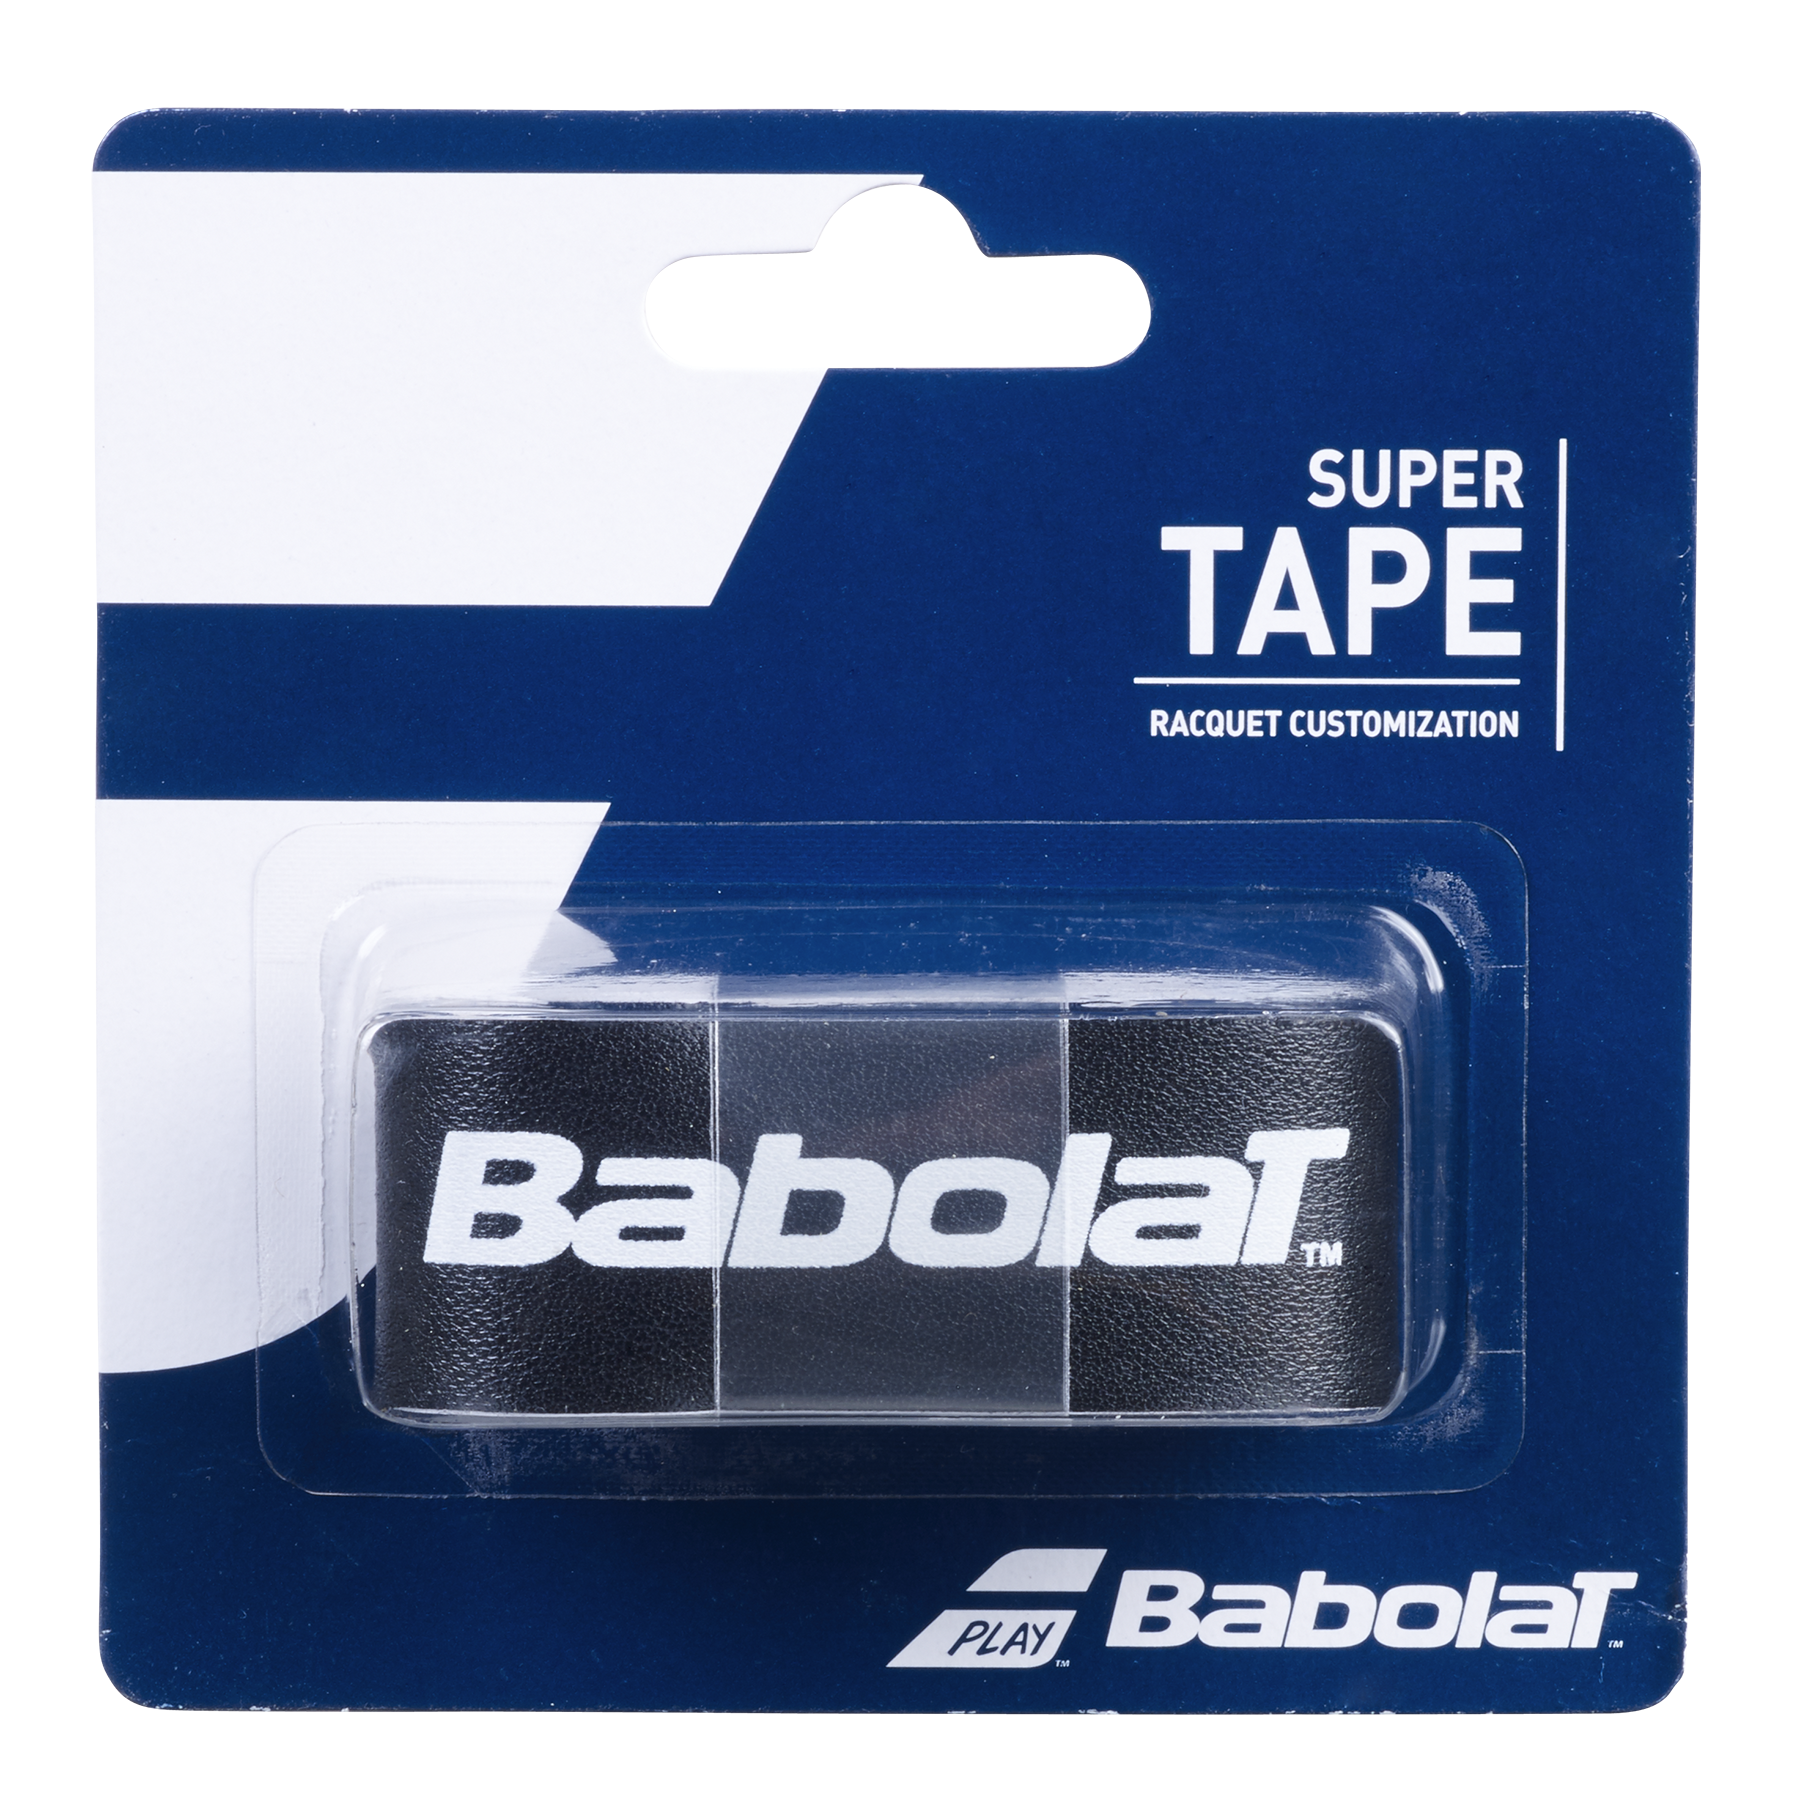 Stam Tussendoortje limiet Tennis Accessories Super Tape | Babolat Official Website